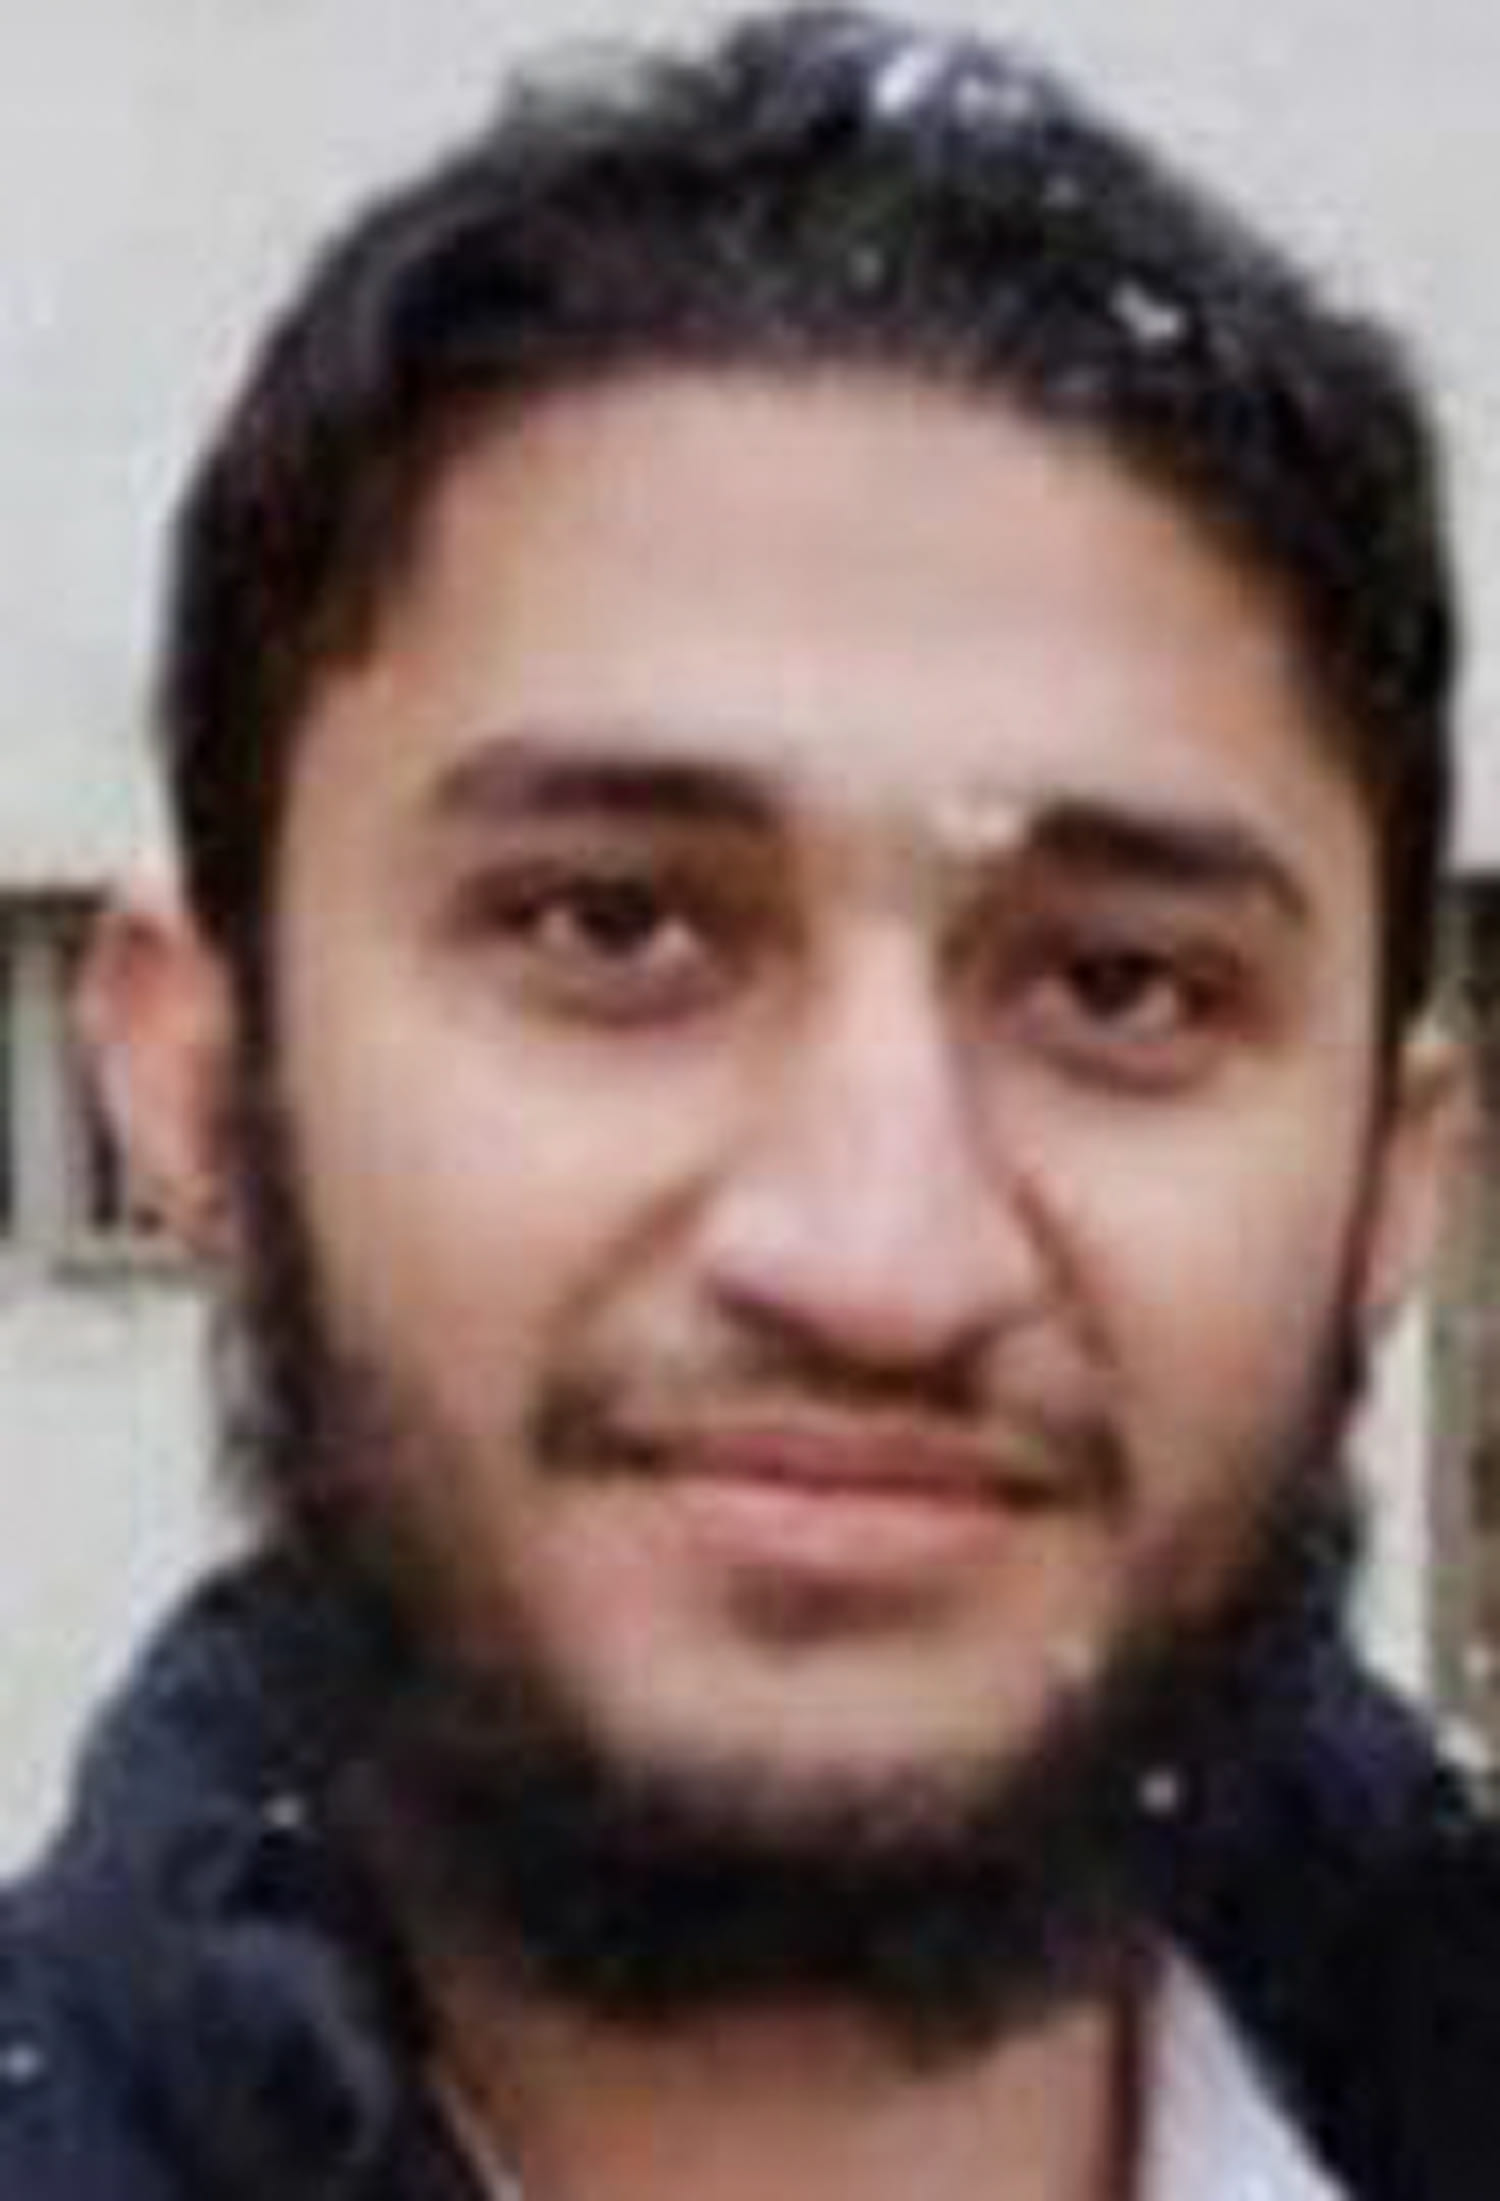 Kabul airport bomber was an ISIS operative freed from prison by the Taliban